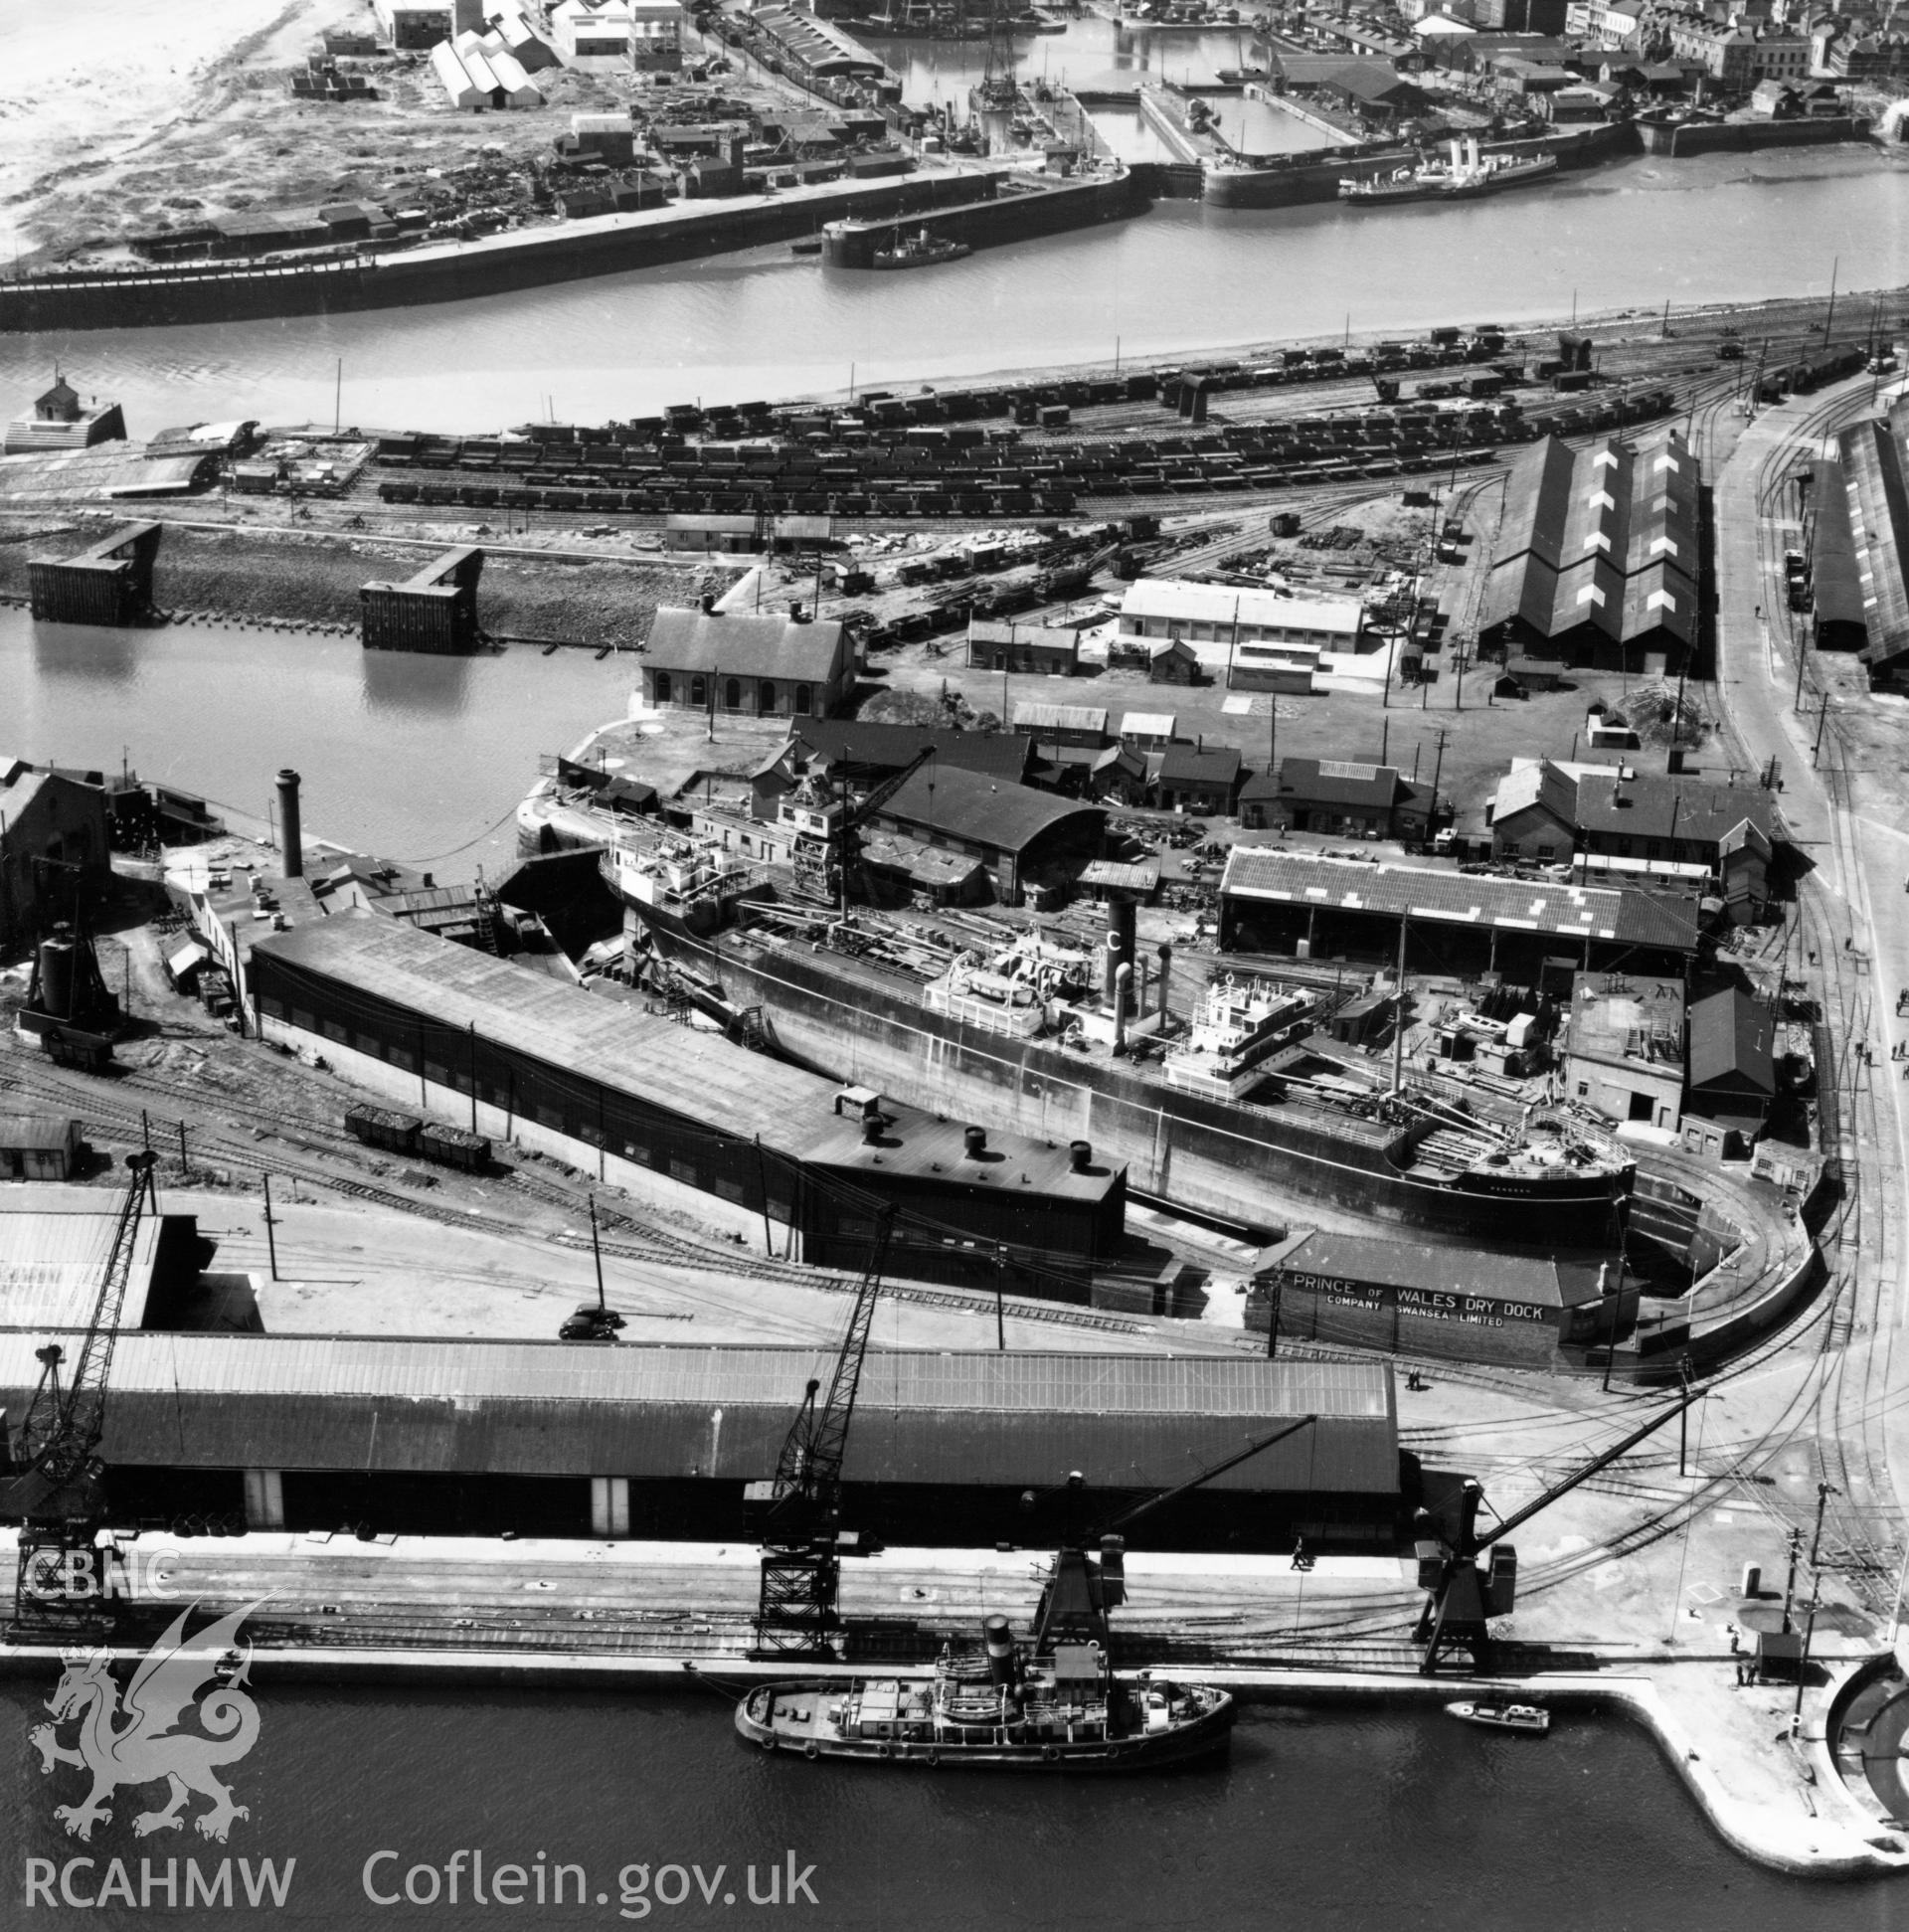 View of Prince of Wales dry dock, Swansea, showing the ship 'Pendeen' in dry dock. Oblique aerial photograph, 5?" cut roll film.